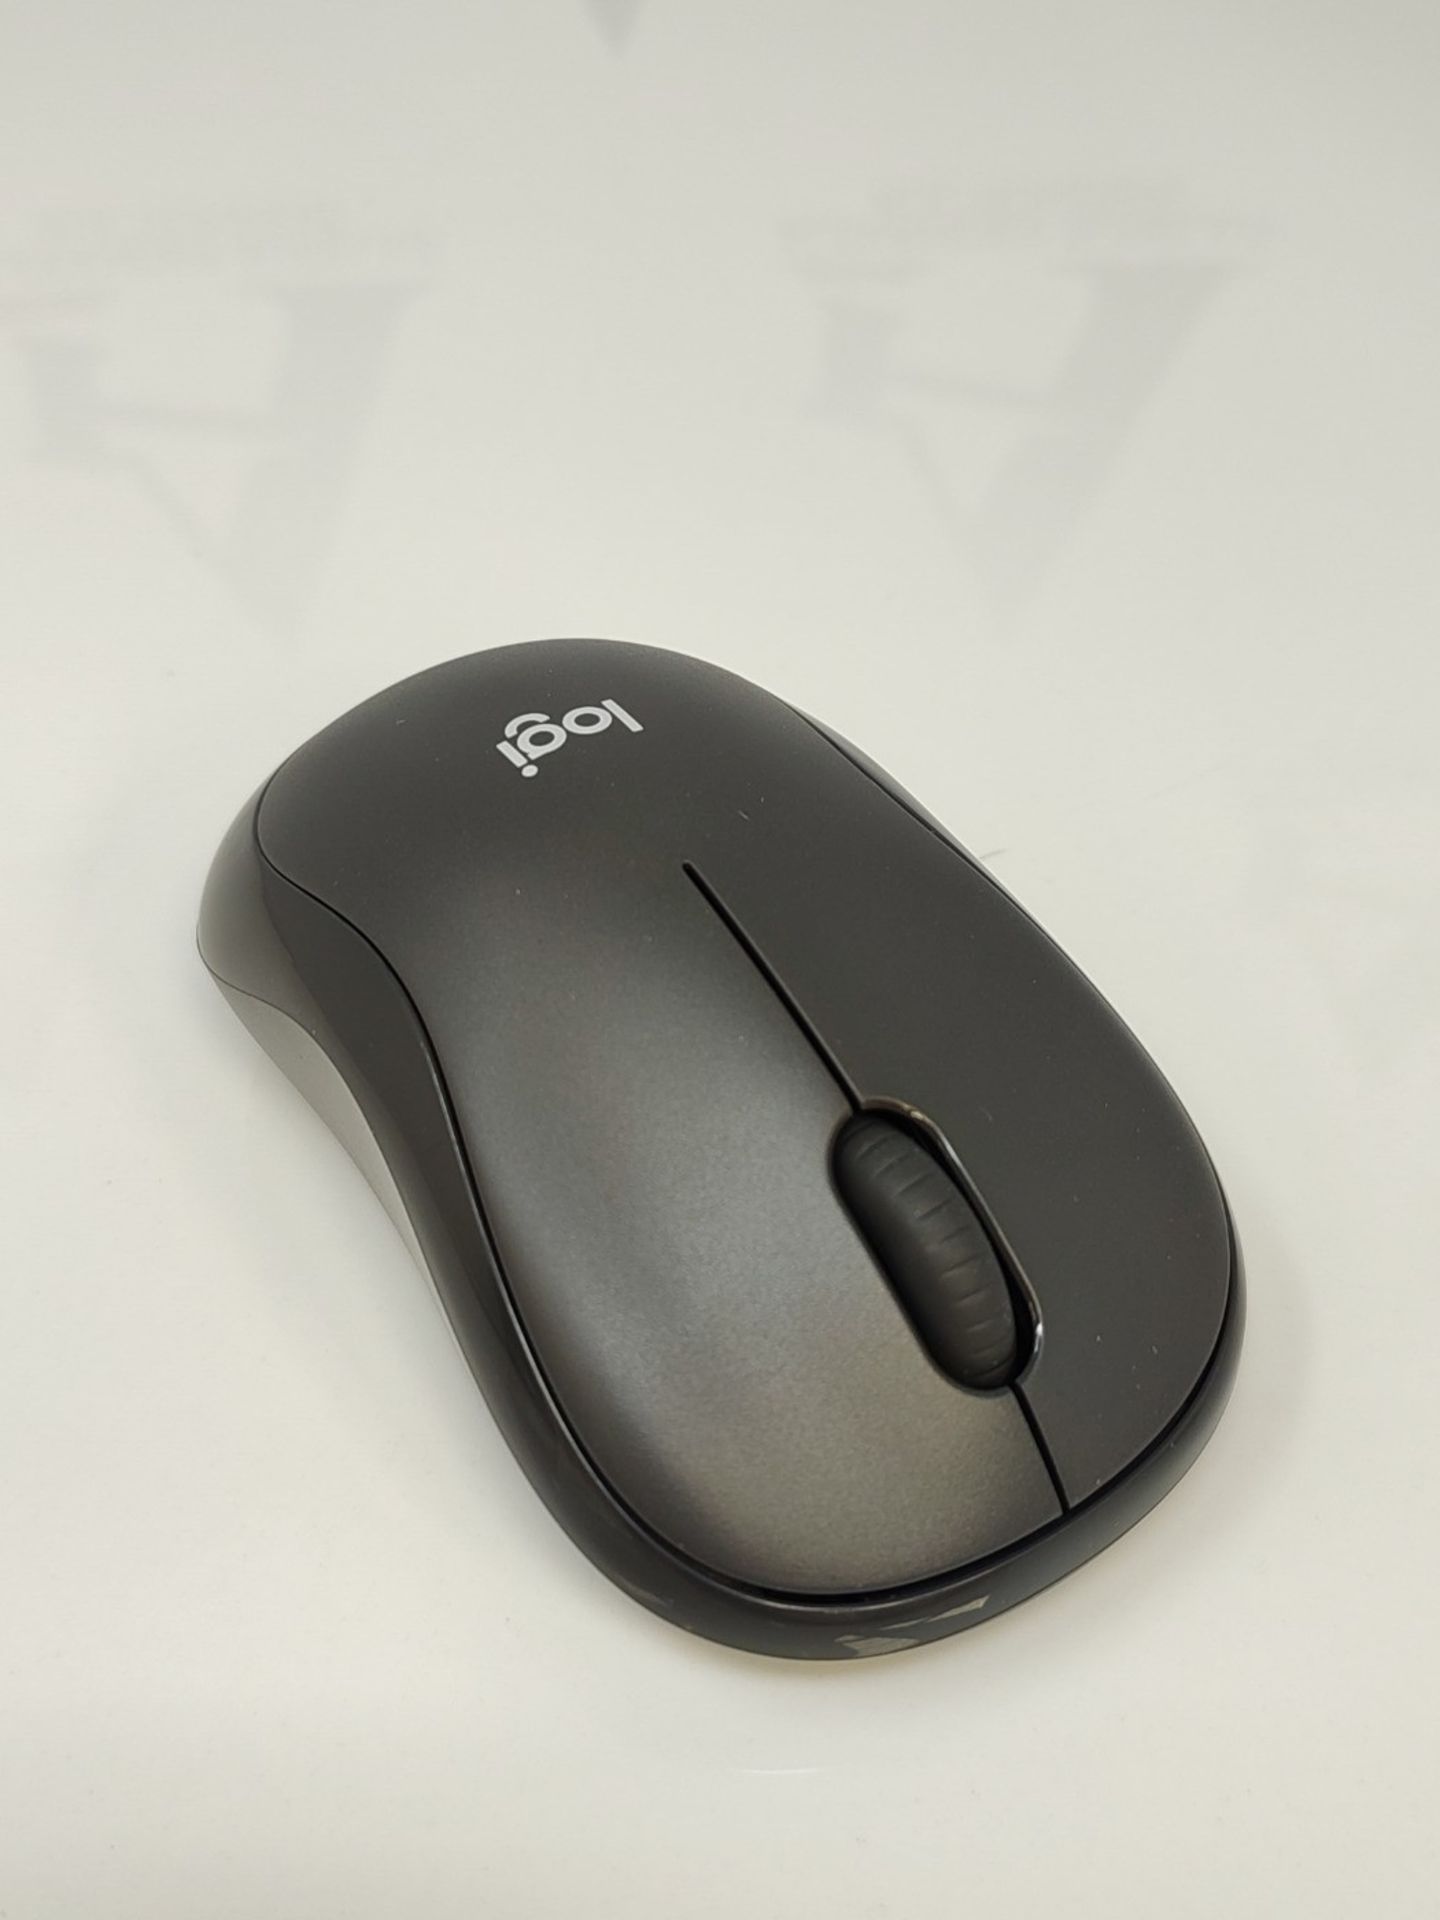 Logitech M240 Silent Bluetooth Mouse, Wireless, Compact, Portable, Smooth Tracking, Ba - Image 3 of 3